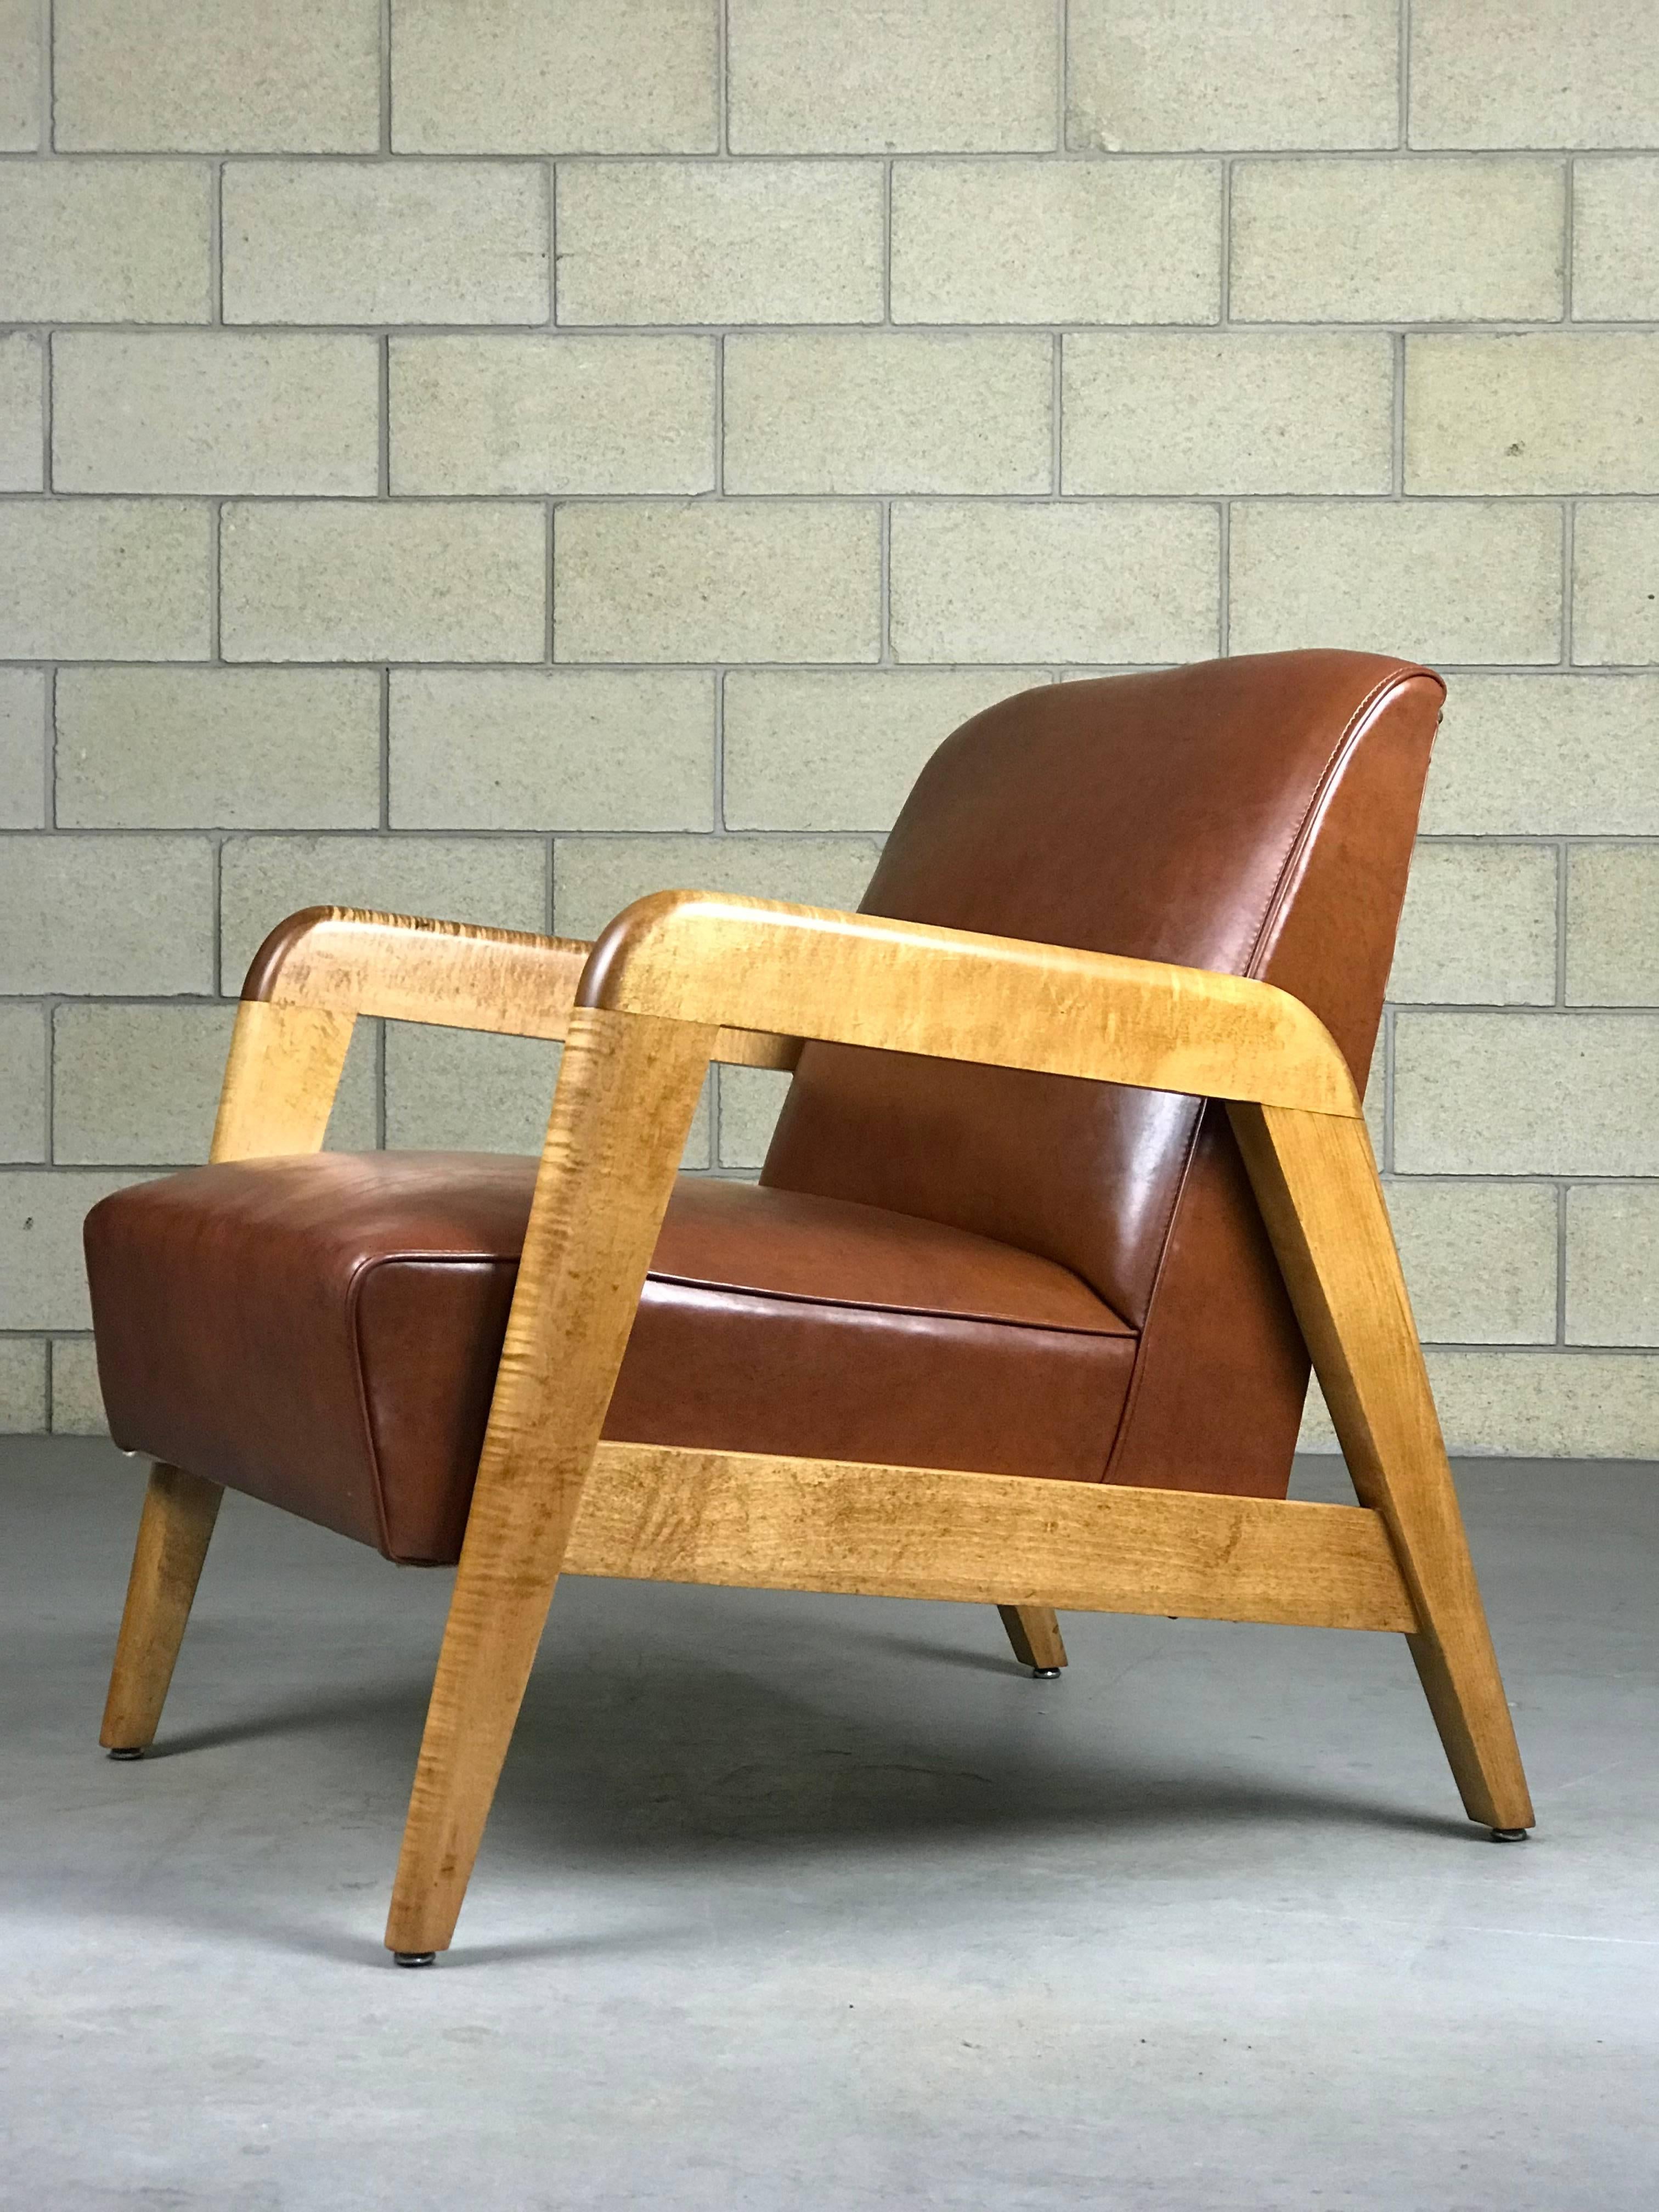 American Early Mid-Century Modern Lounge Chair by Russel Wright for Thonet 